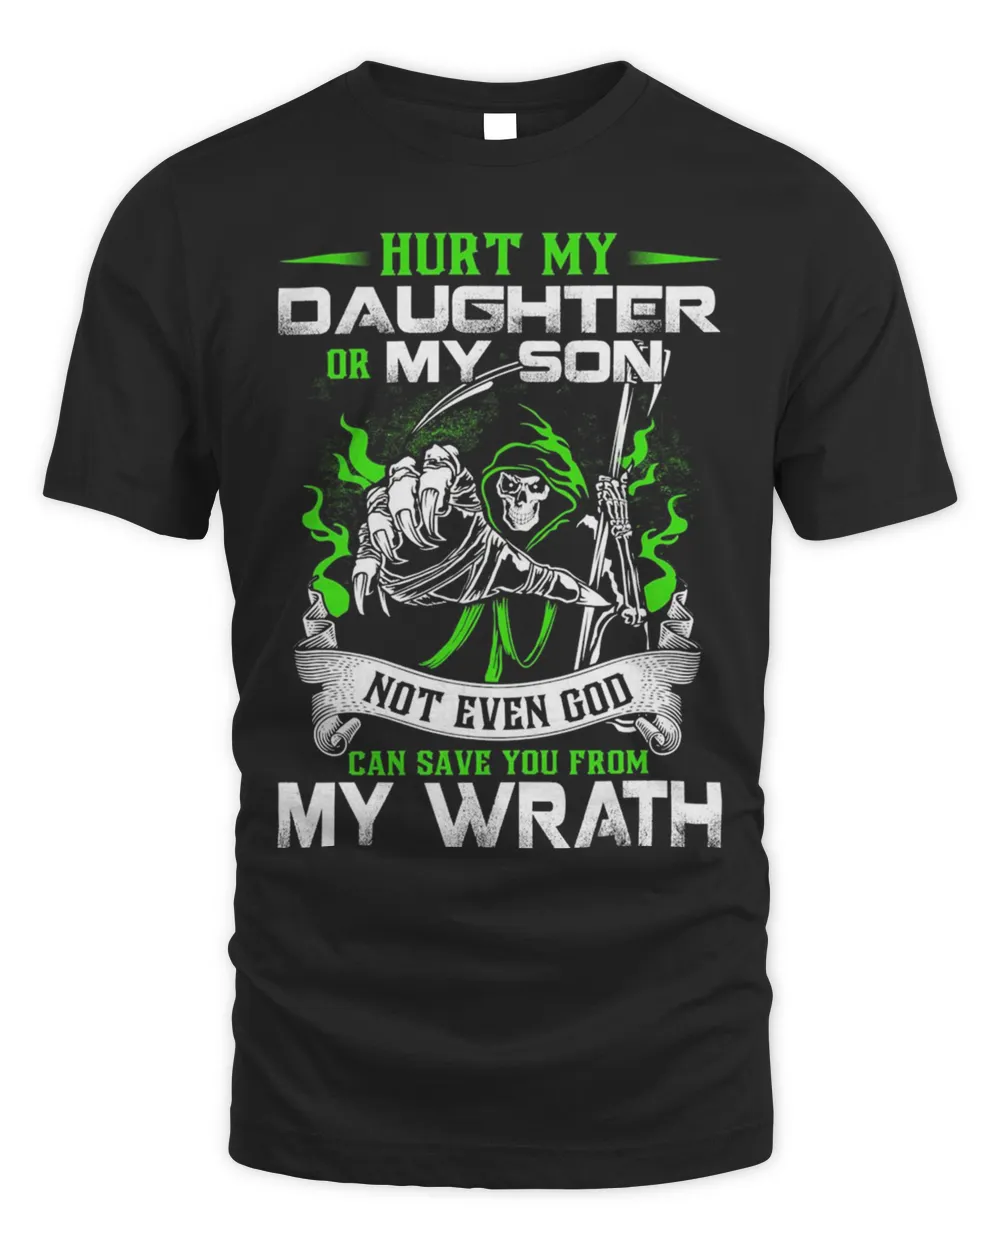 Hurt My Daughter Or My Son Not Even God Can Save You From My Wrath Shirt